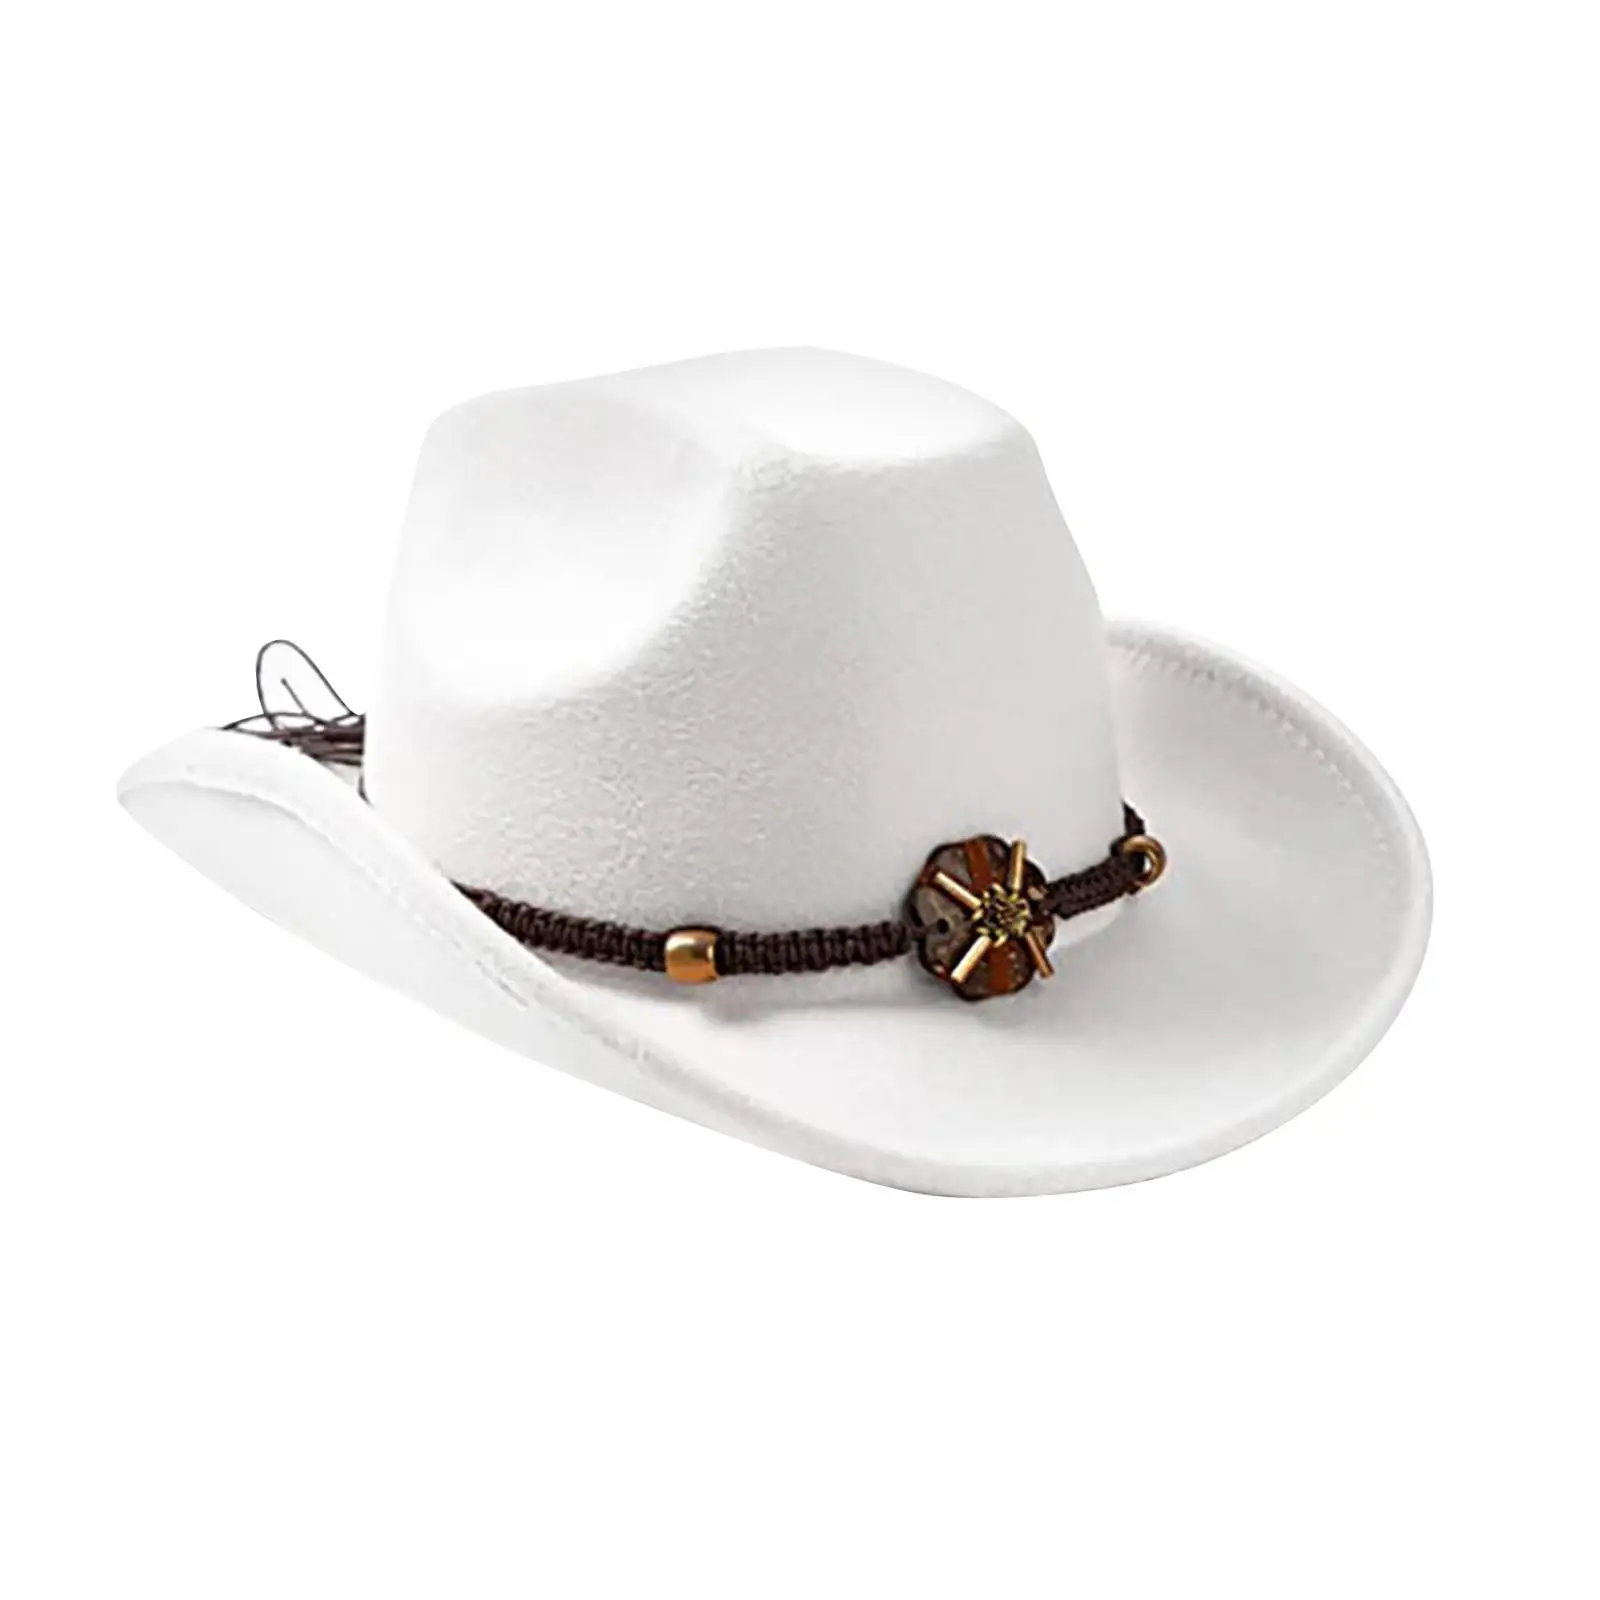 Classic Western Cowboy Hat Sun Hats Cosplay Props Big Brim Fancy Dress Costume Sunshade for Teens Adults Party Dress up Fishing